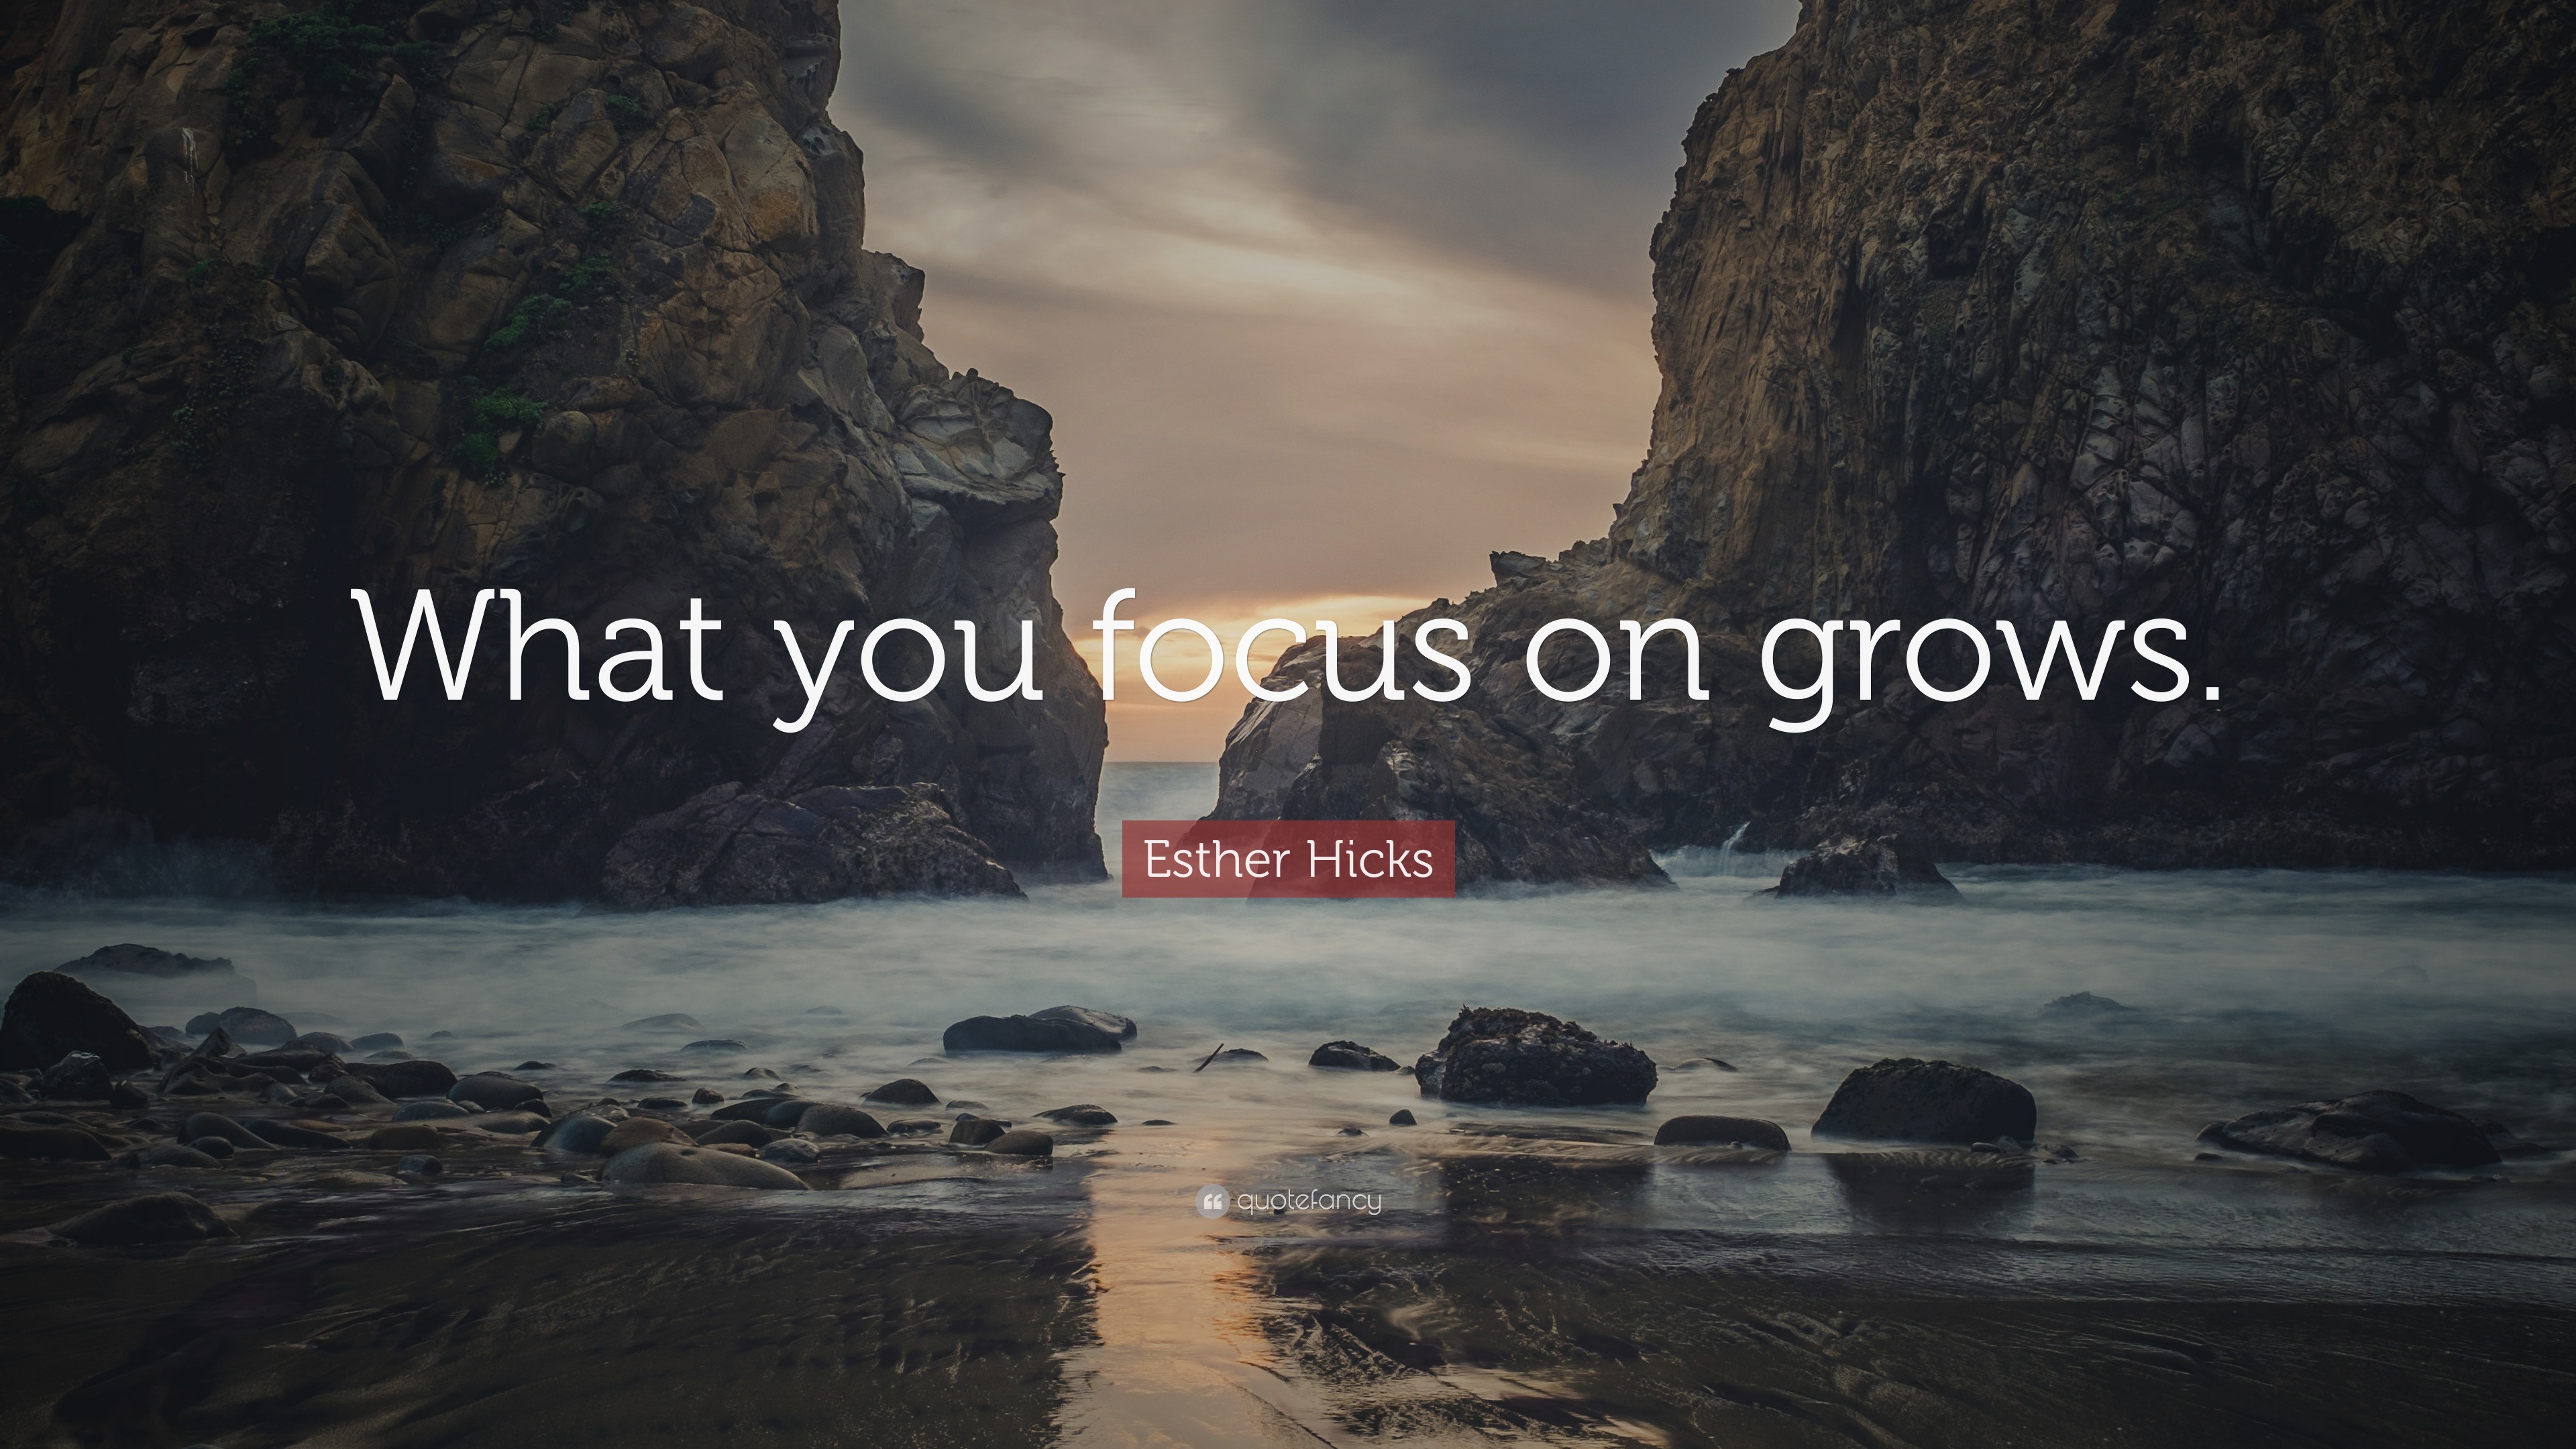 Esther Hicks Quote: “What you focus on grows.”